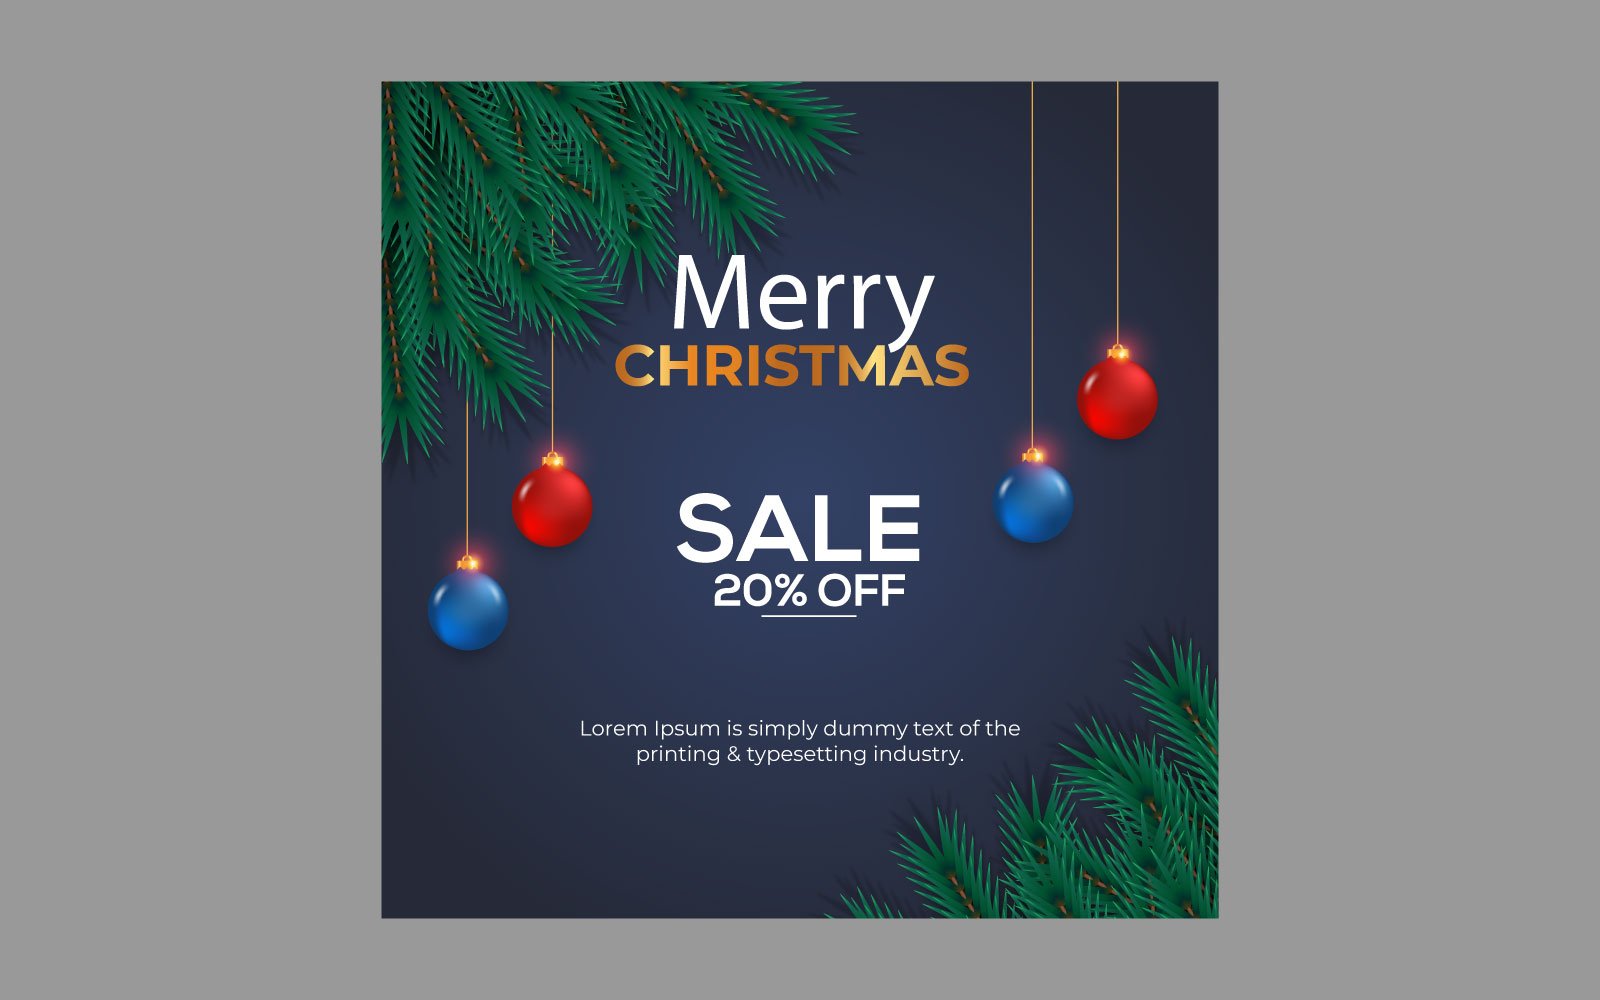 Merry Christmas sale post social media post decoration with pine branch and balls